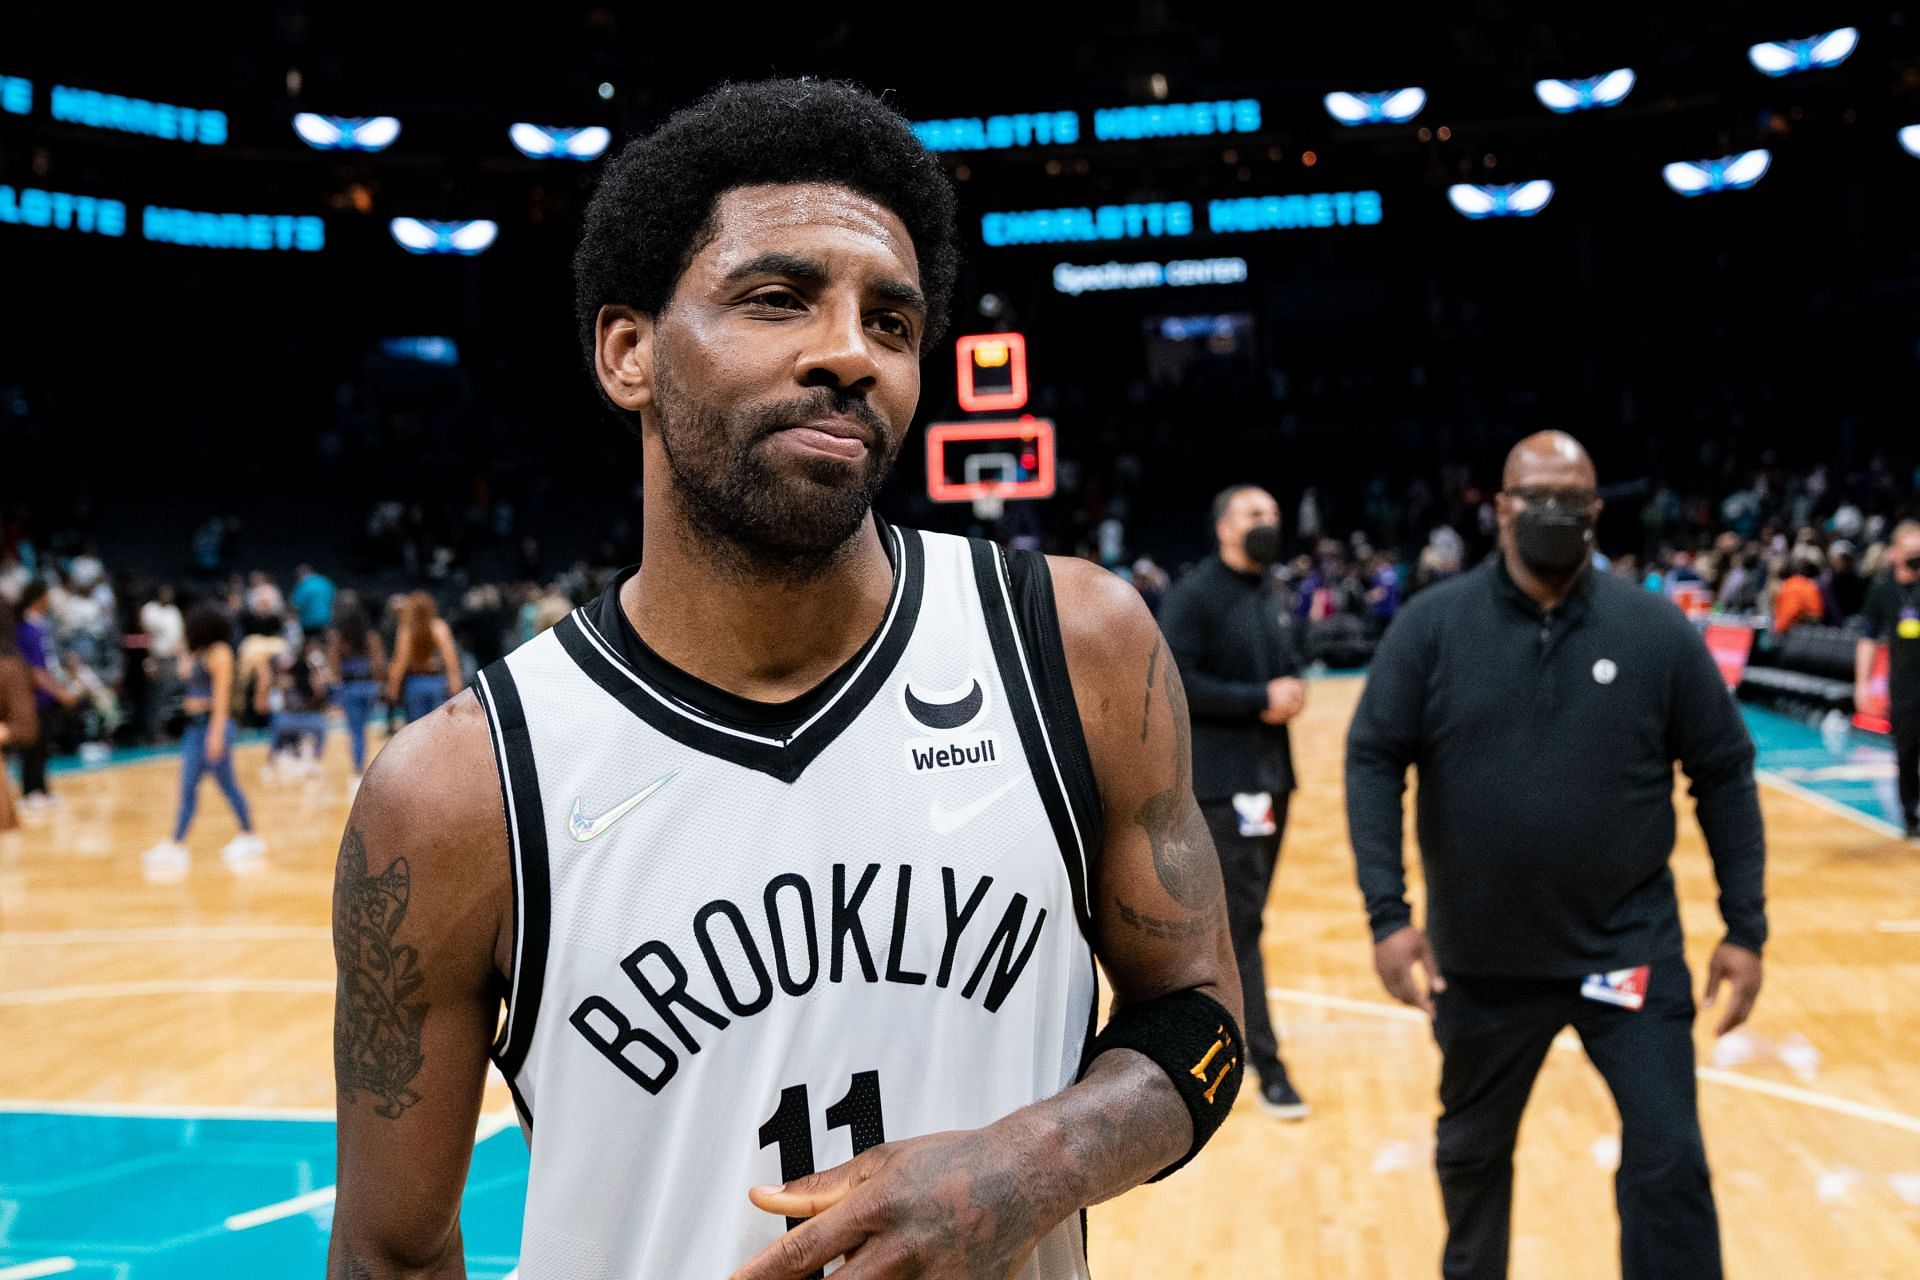 Nets superstar Kyrie Irving is available for home games now.